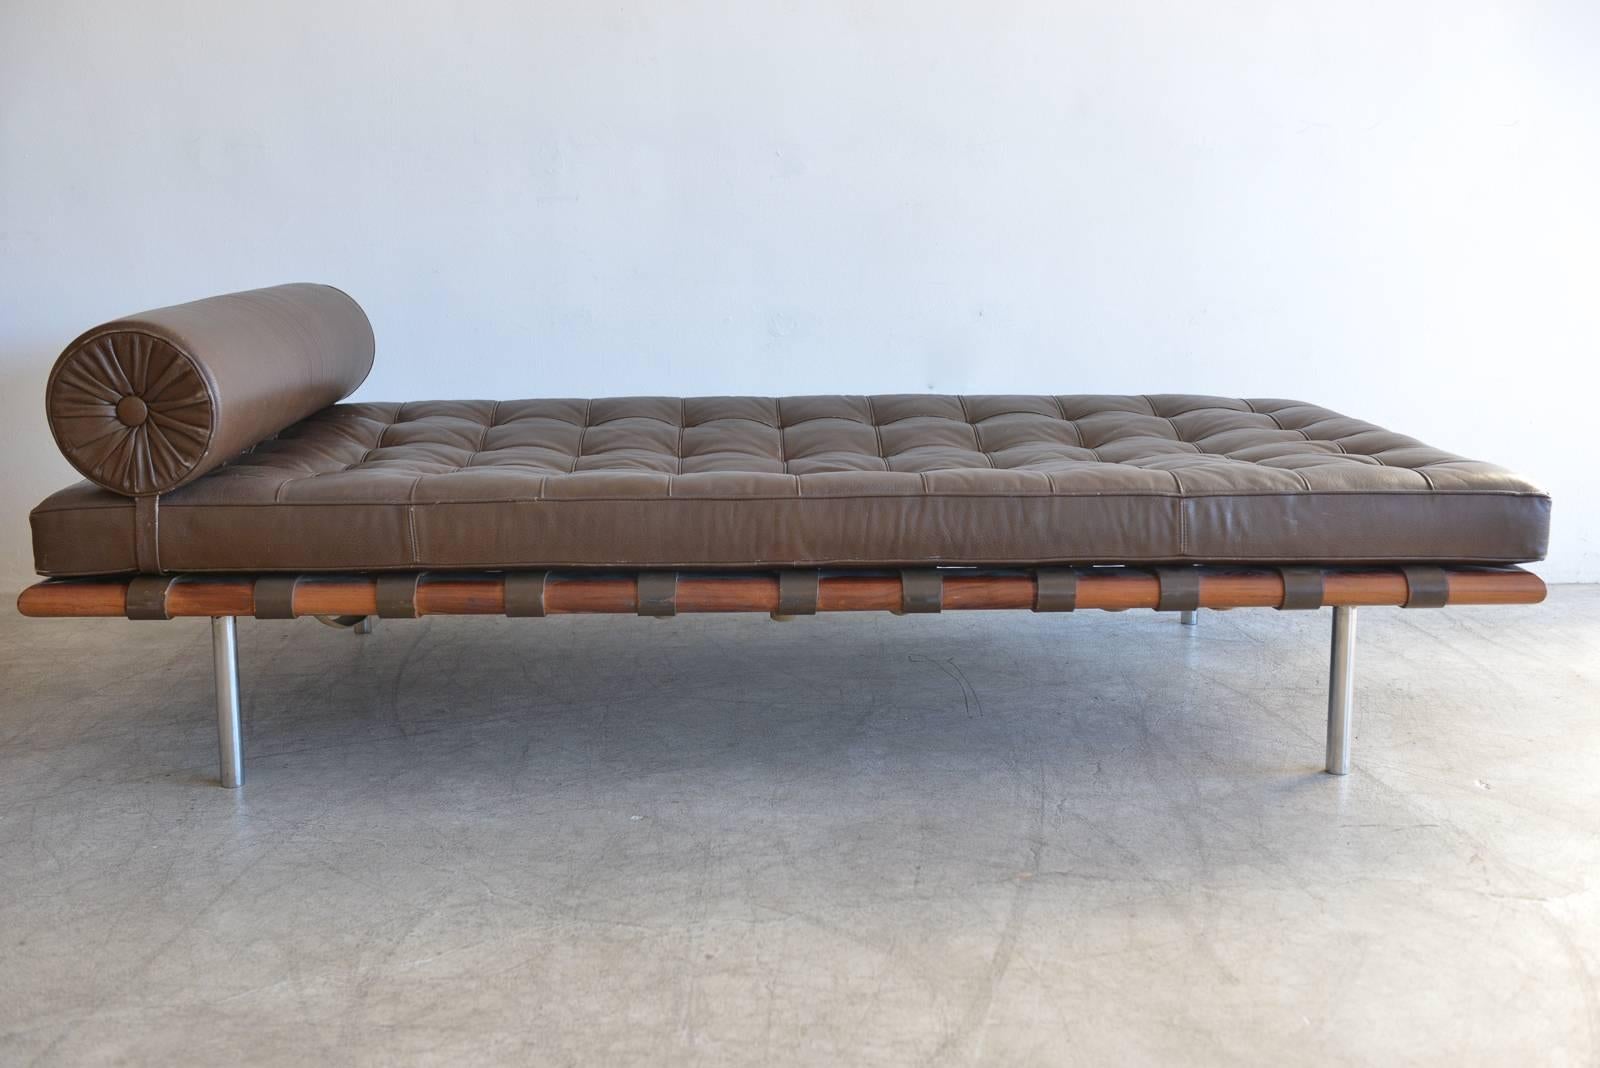 Early and exceptional example of a Ludwig Mies Van Der Rohe Barcelona Daybed for Knoll. Beautiful chocolate brown leather in very good vintage condition with excellent patina. Chrome legs with no rusting, original strapping on underside and early